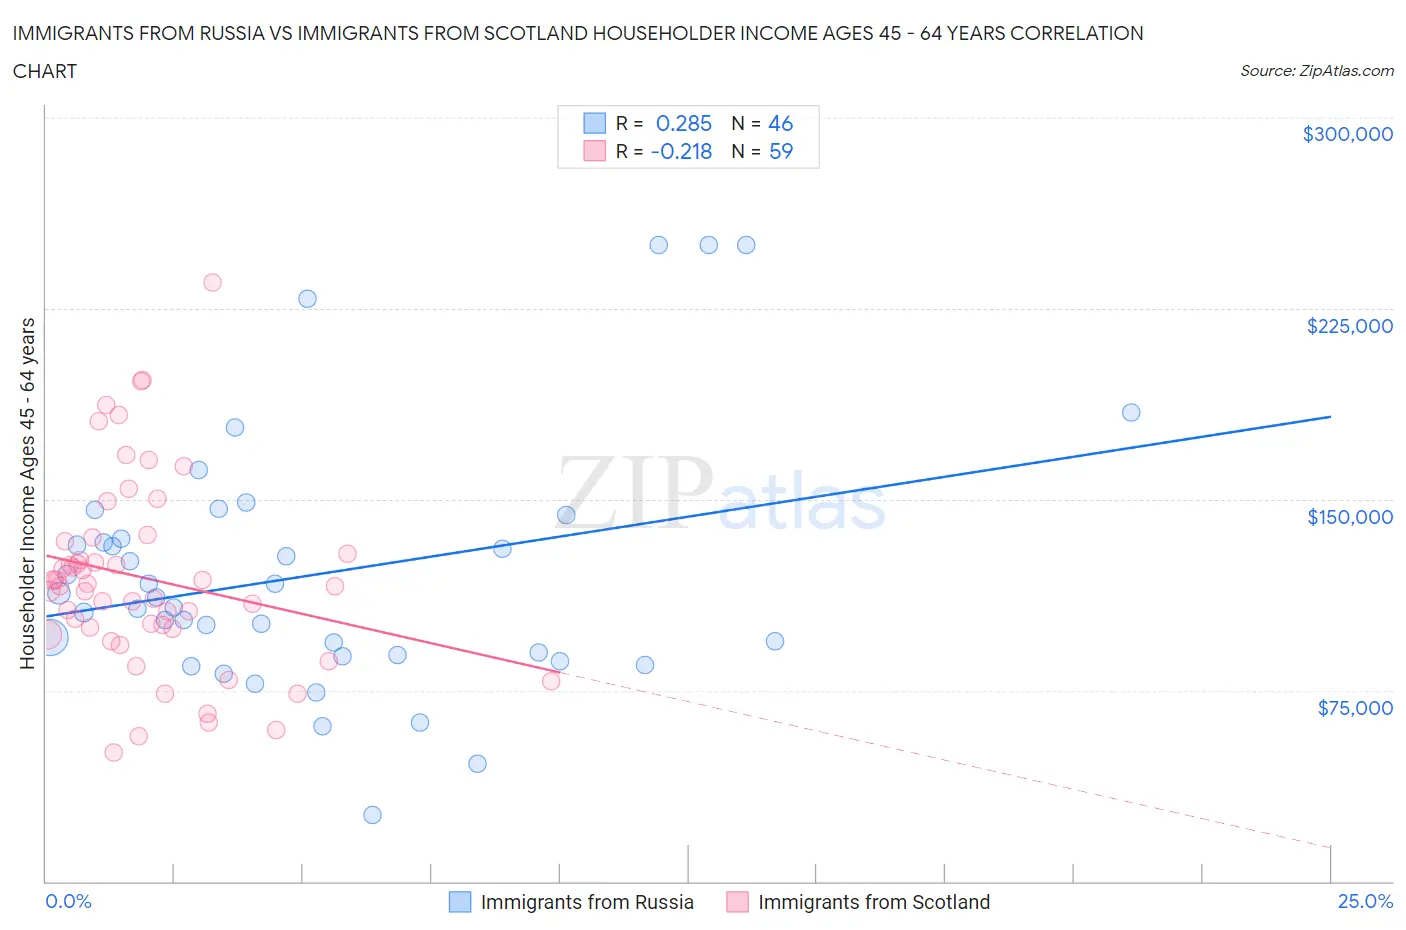 Immigrants from Russia vs Immigrants from Scotland Householder Income Ages 45 - 64 years